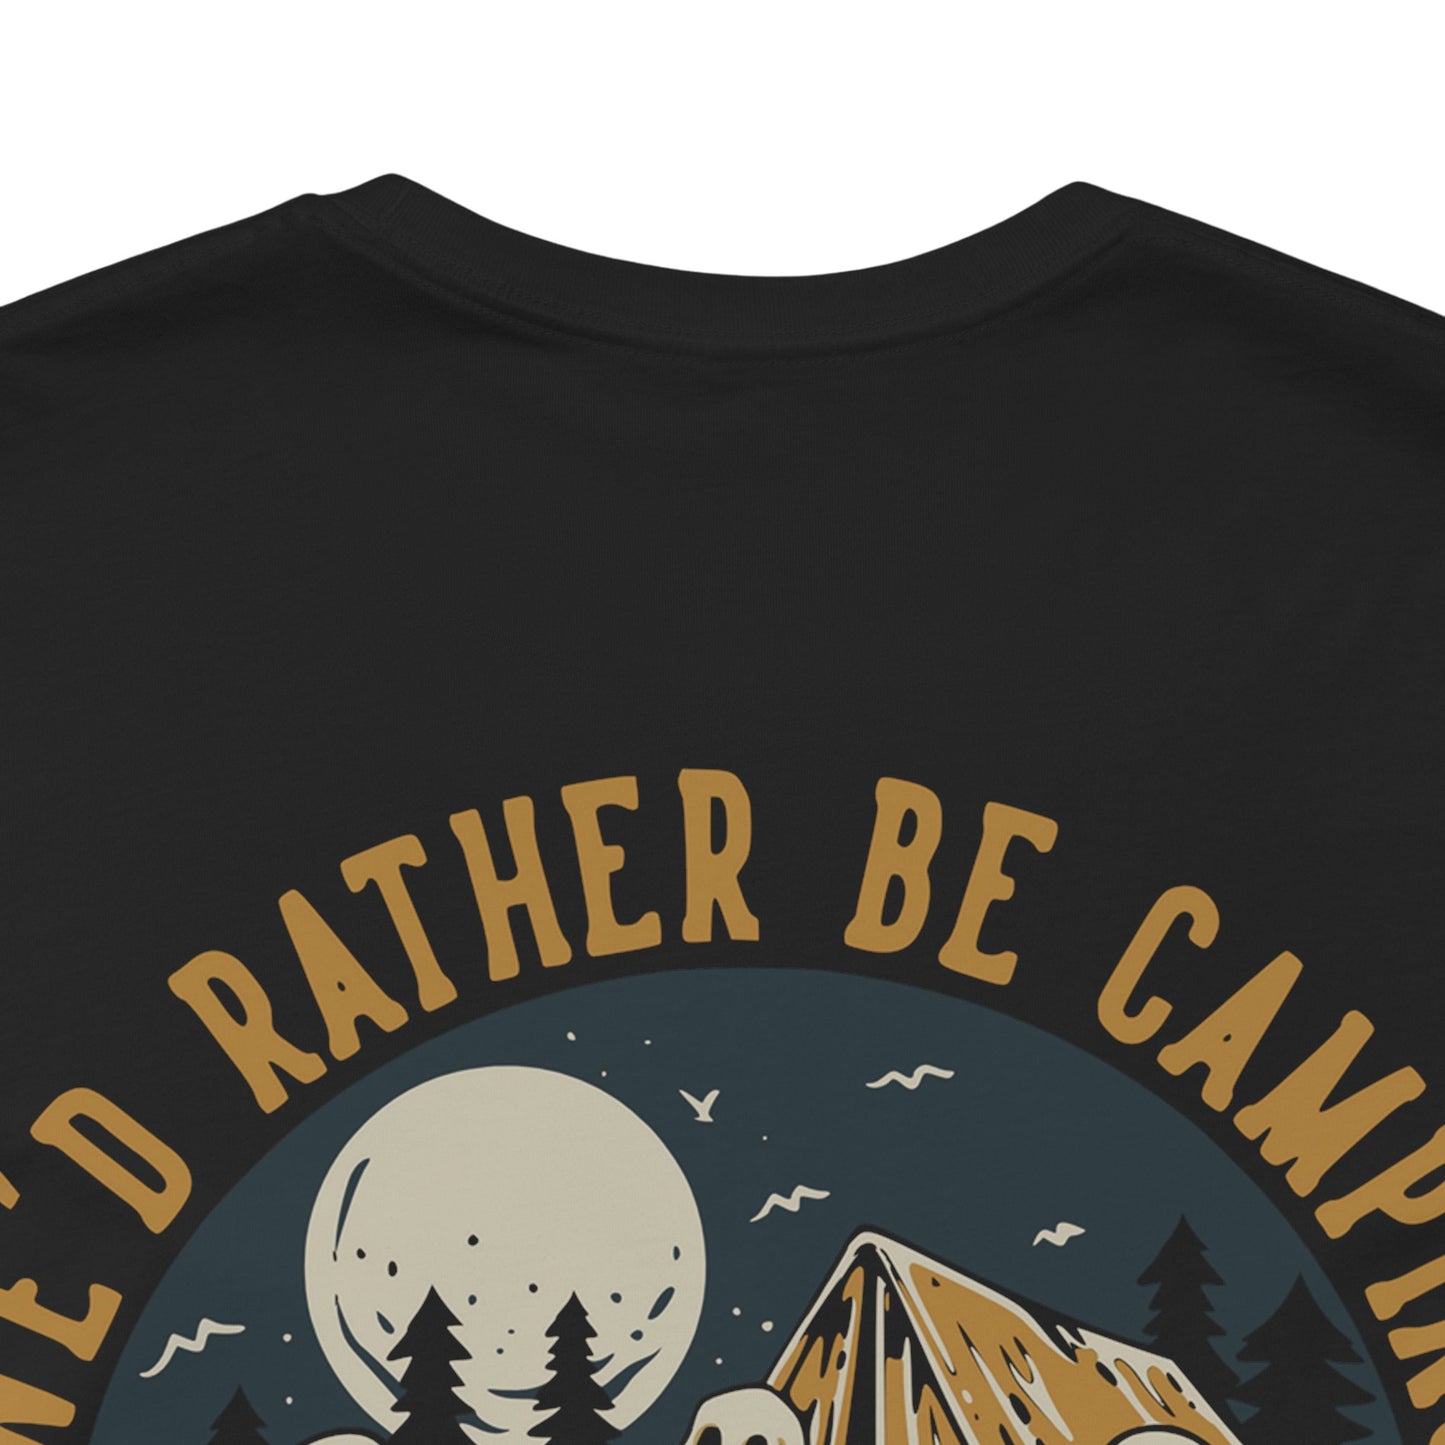 Rather be Camping - T-Shirt